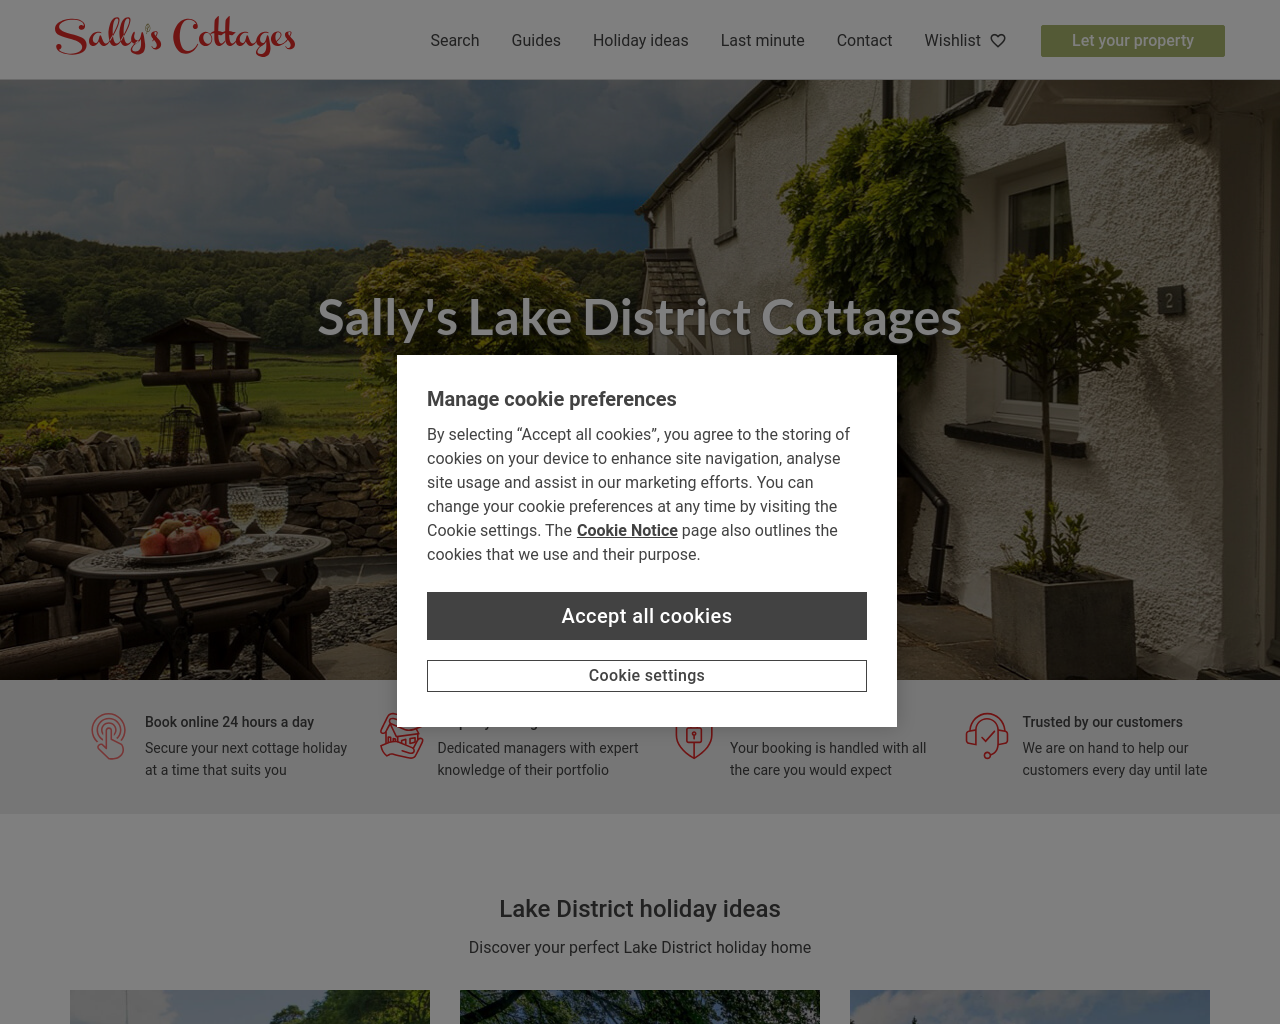 sallyscottages.co.uk